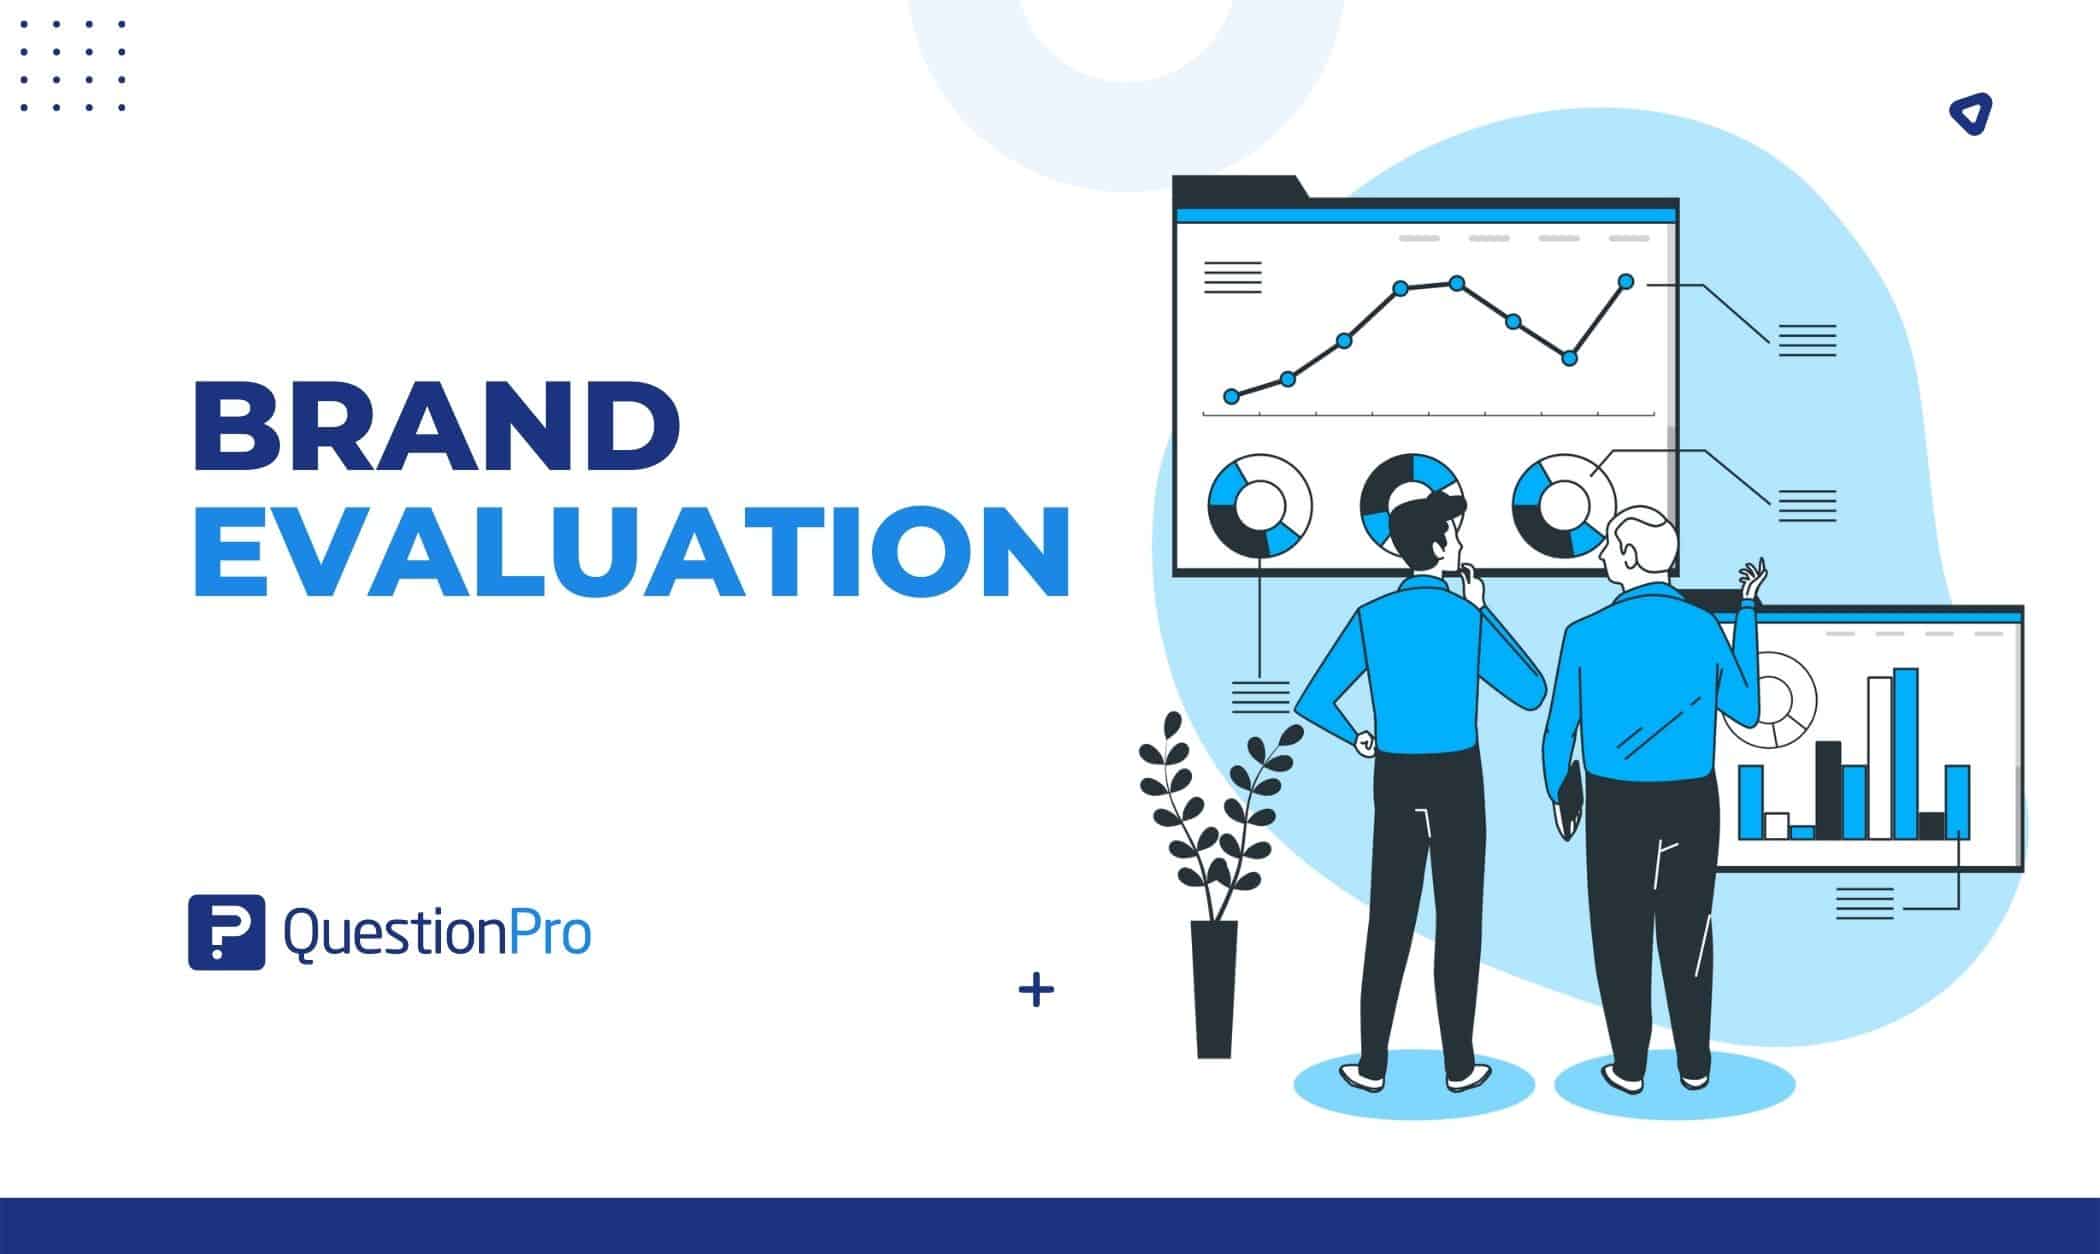 Brand evaluation is calculating a brand's value using relevant metrics that measure the influence a brand has on users and consumers.